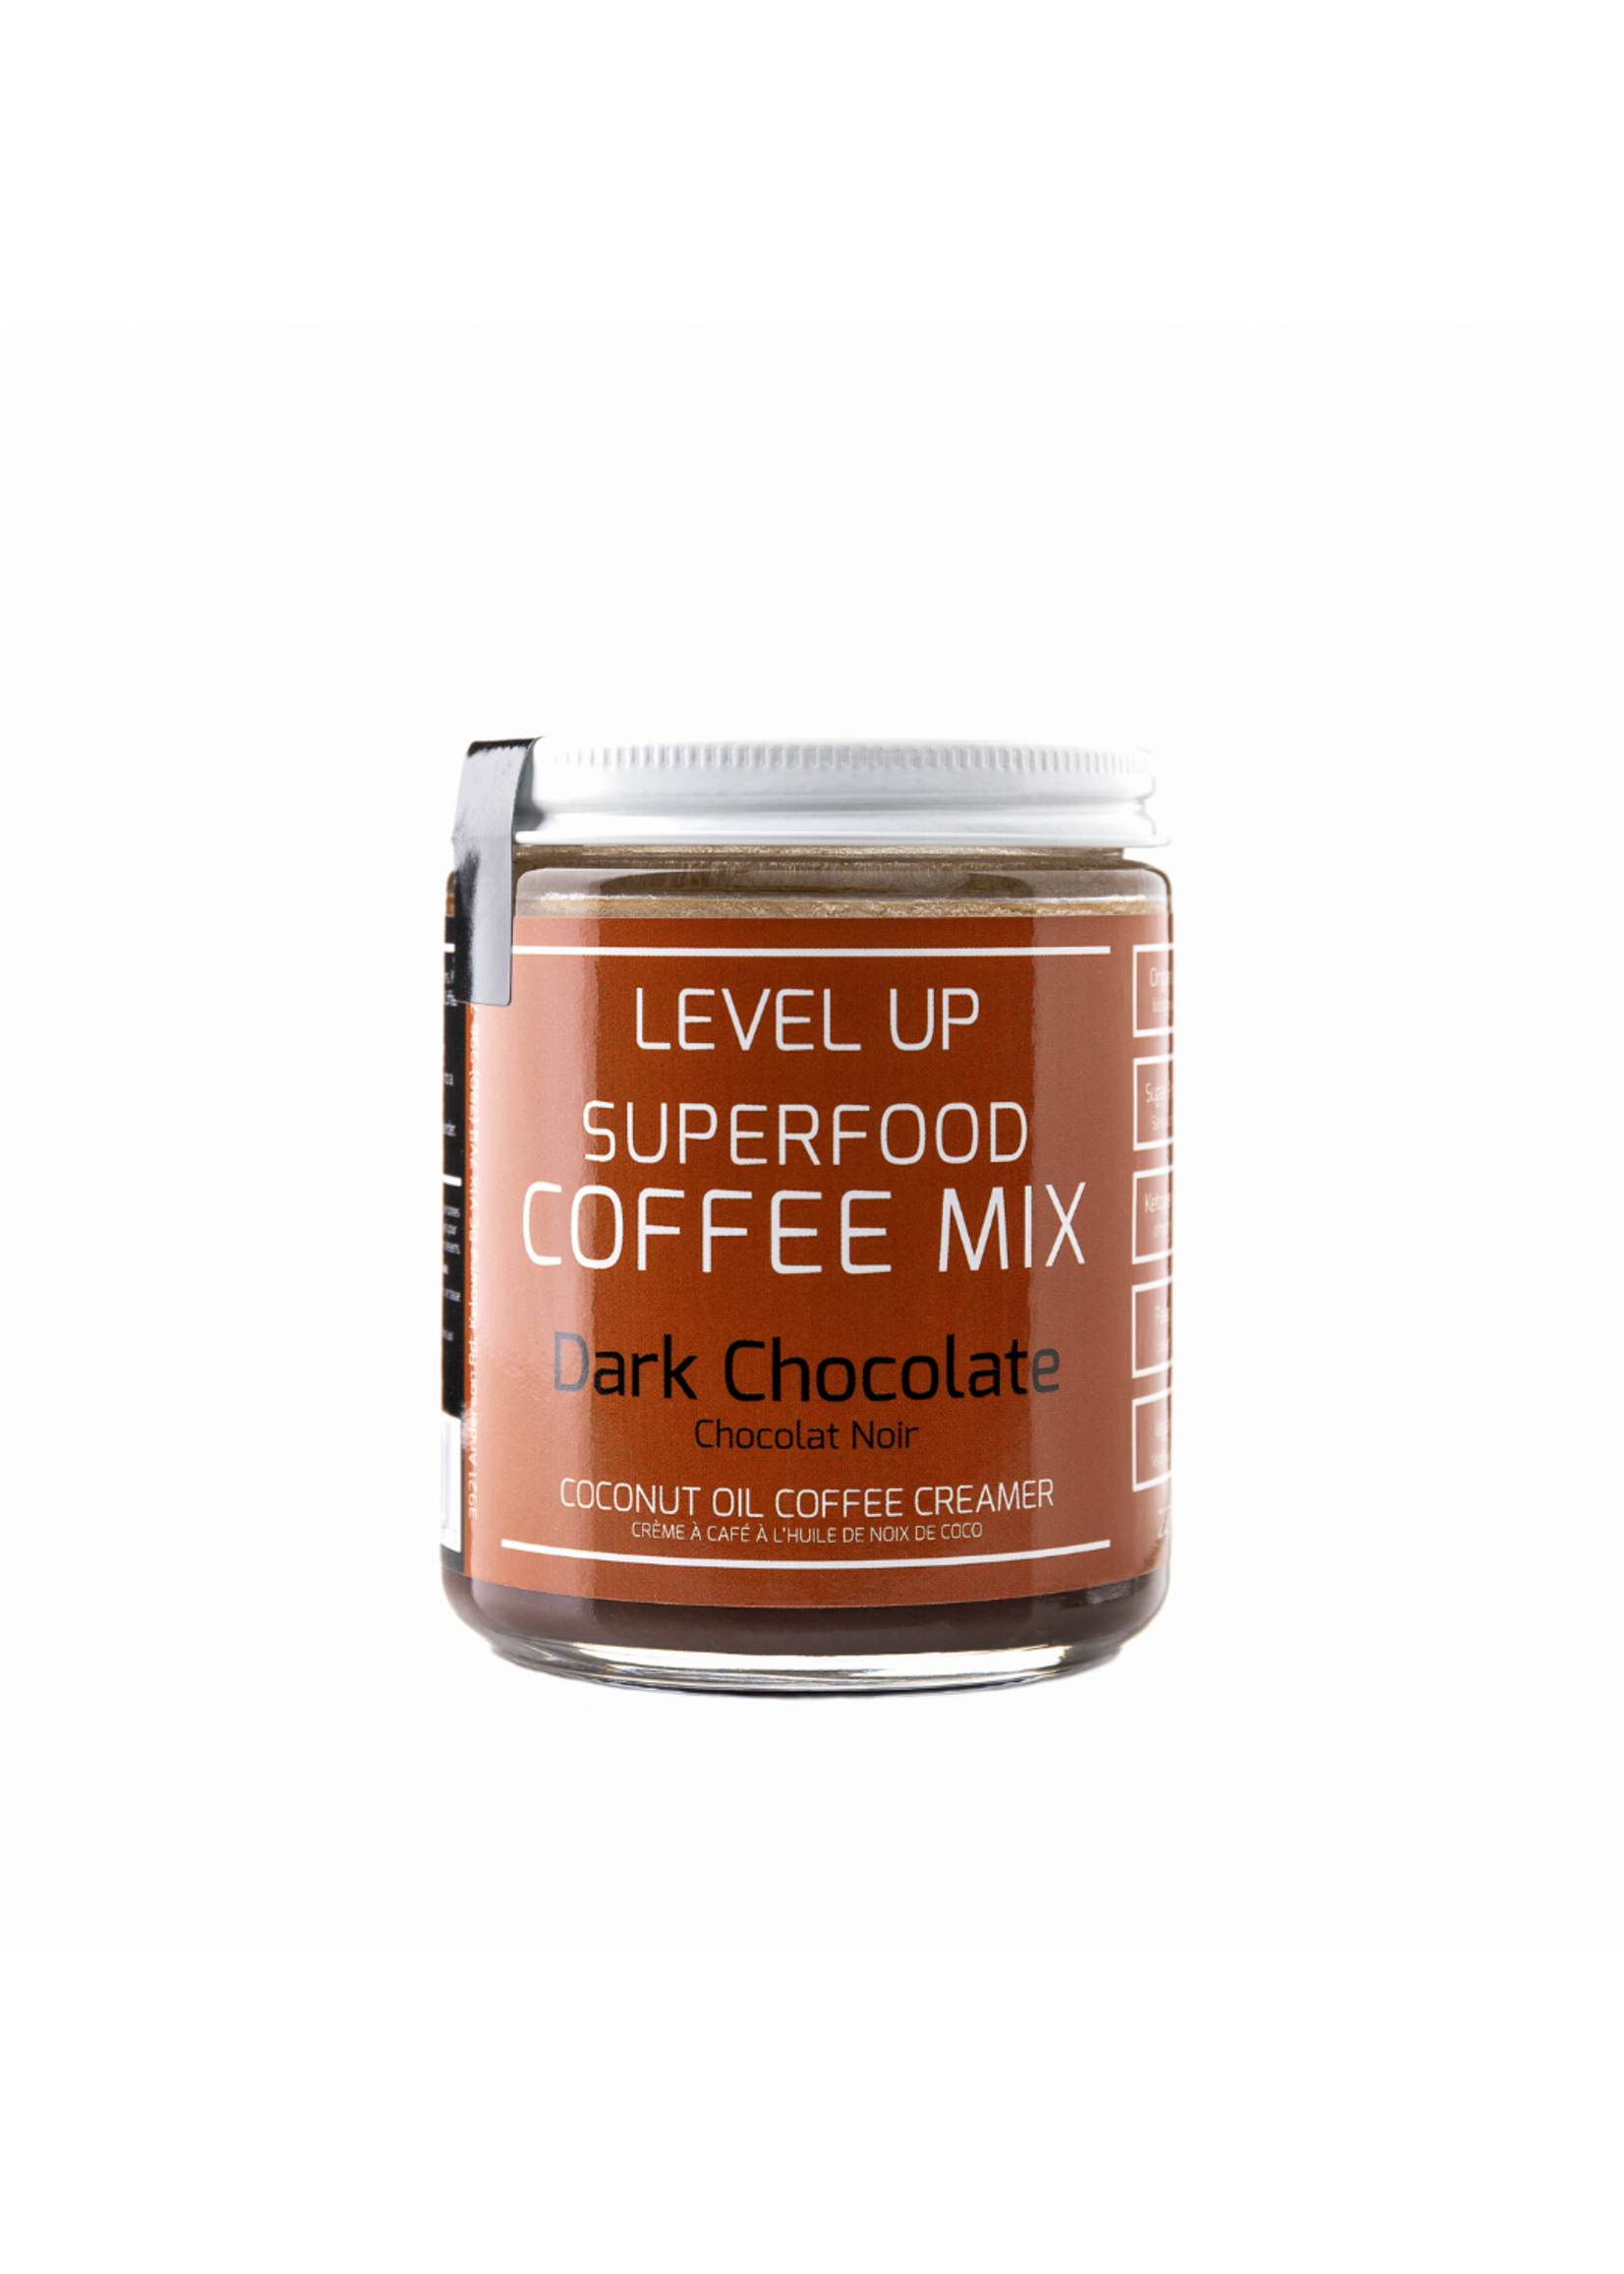 Level up Superfood DC/ LEVEL UP COFFEE MIX- DARKCHOCOLATE